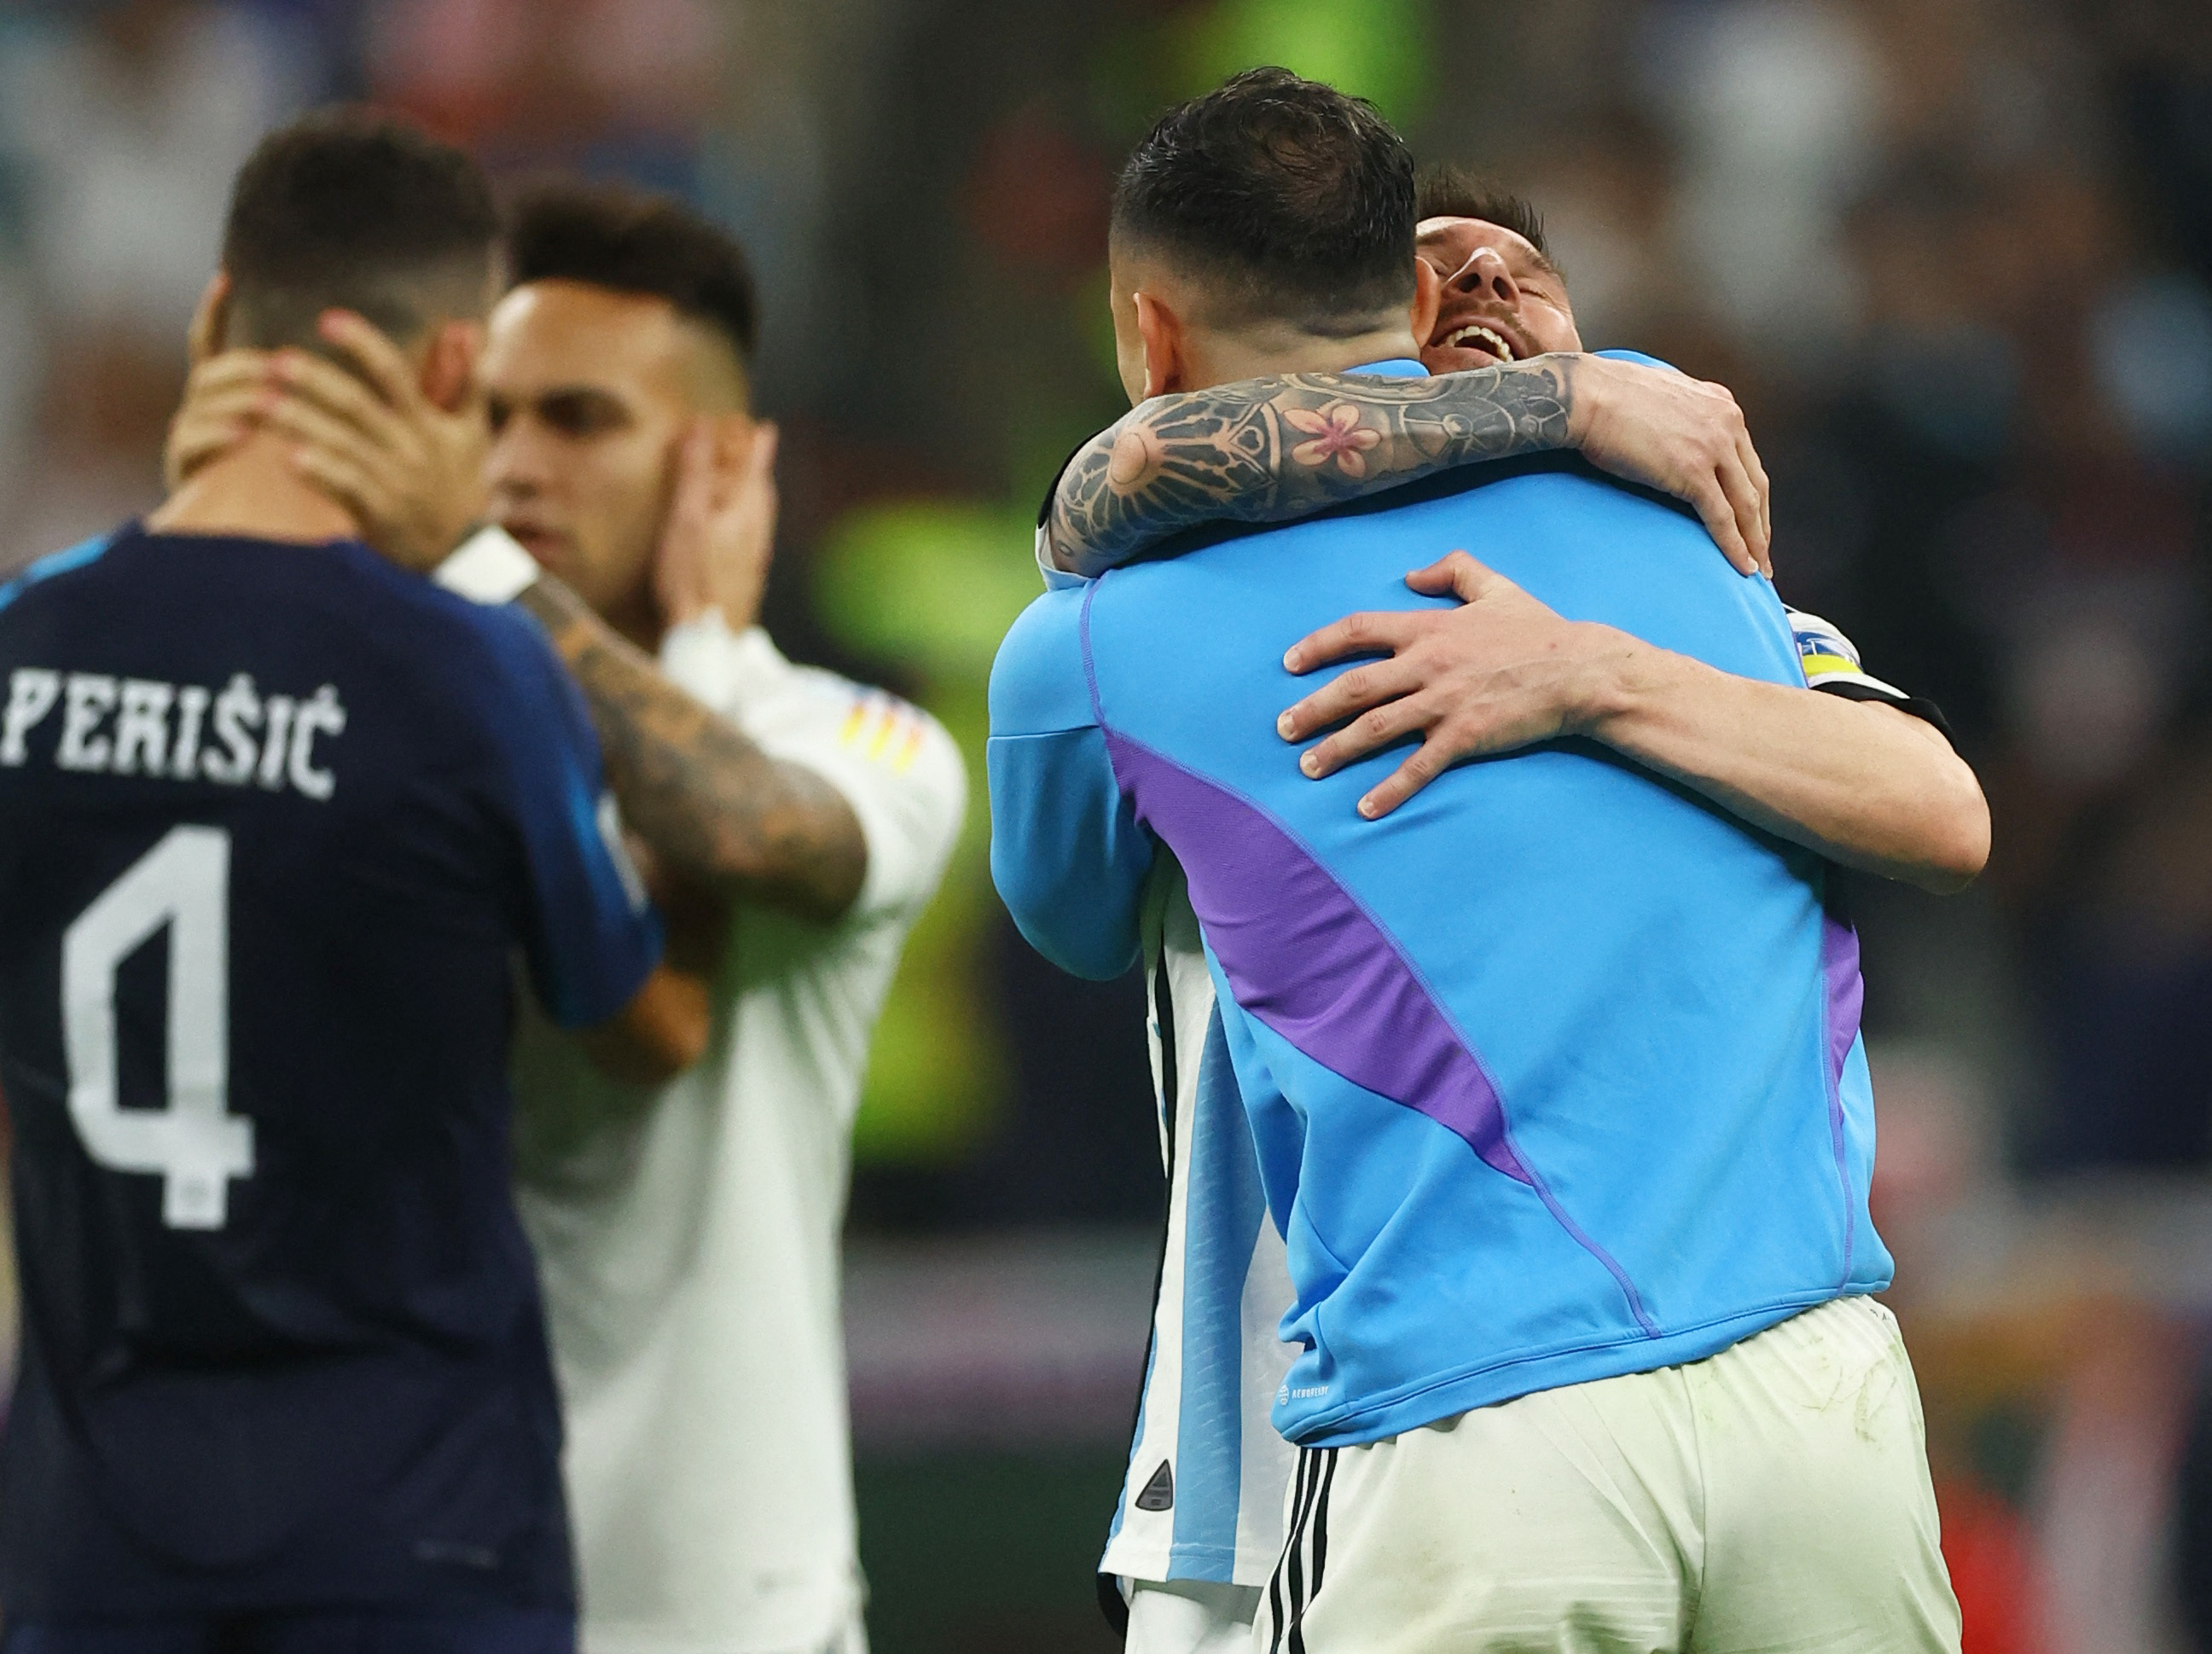 Lautaro Martínez comforts his former teammate Perisic, another experienced Croatian player with a past at Inter Milan